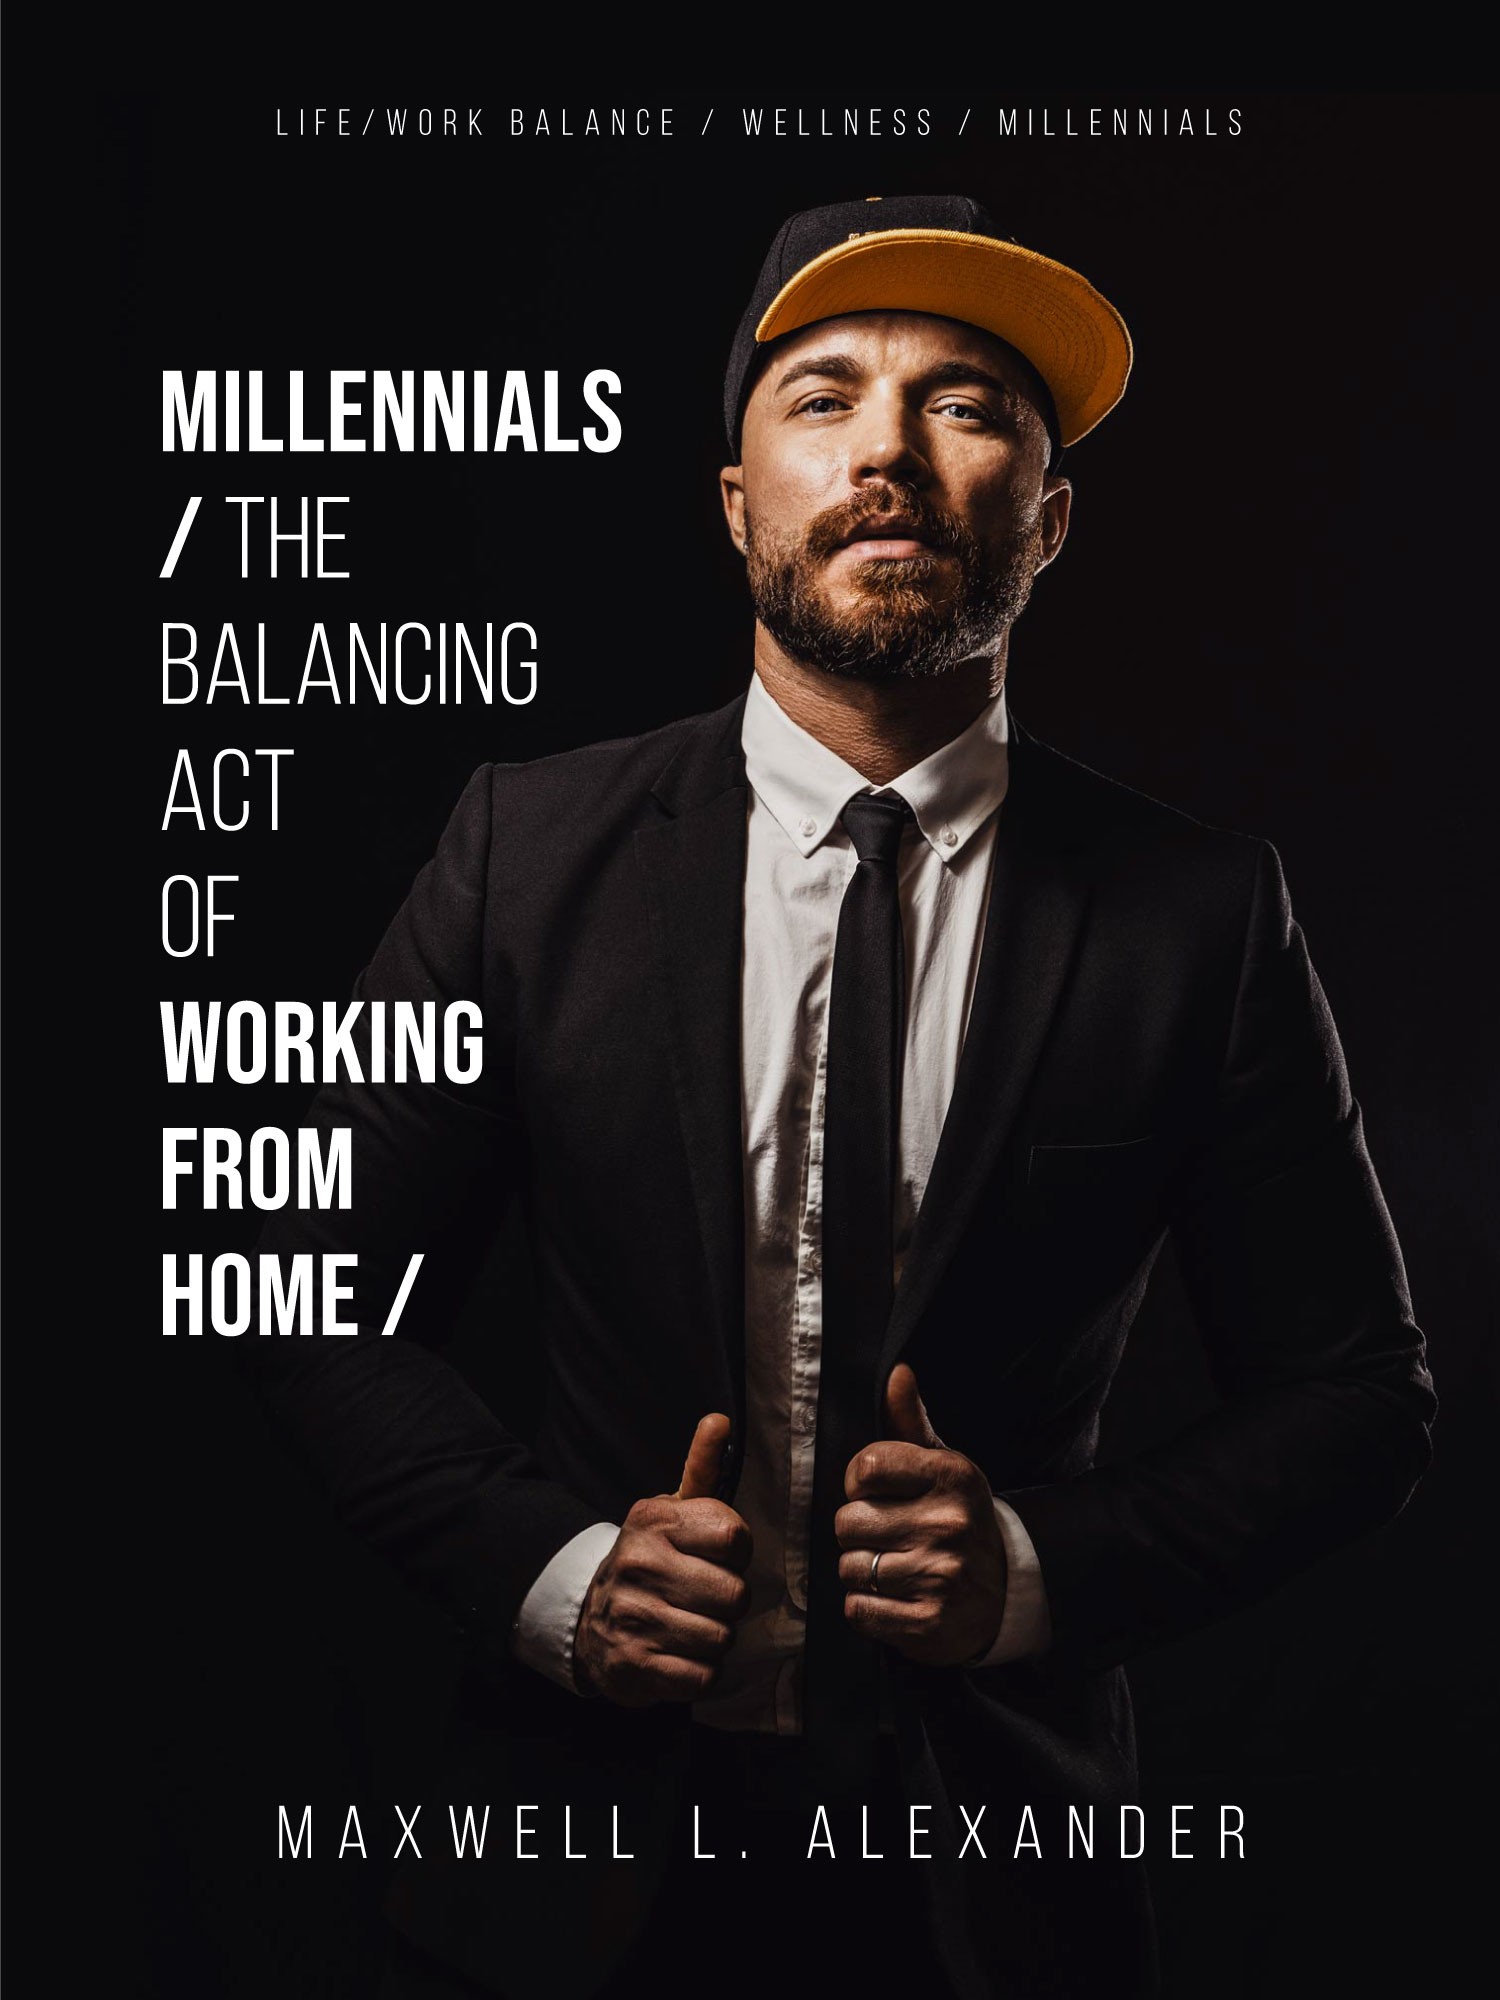 Millennials - The Balancing Act of Working from Home - Tips by Maxwell Alexander